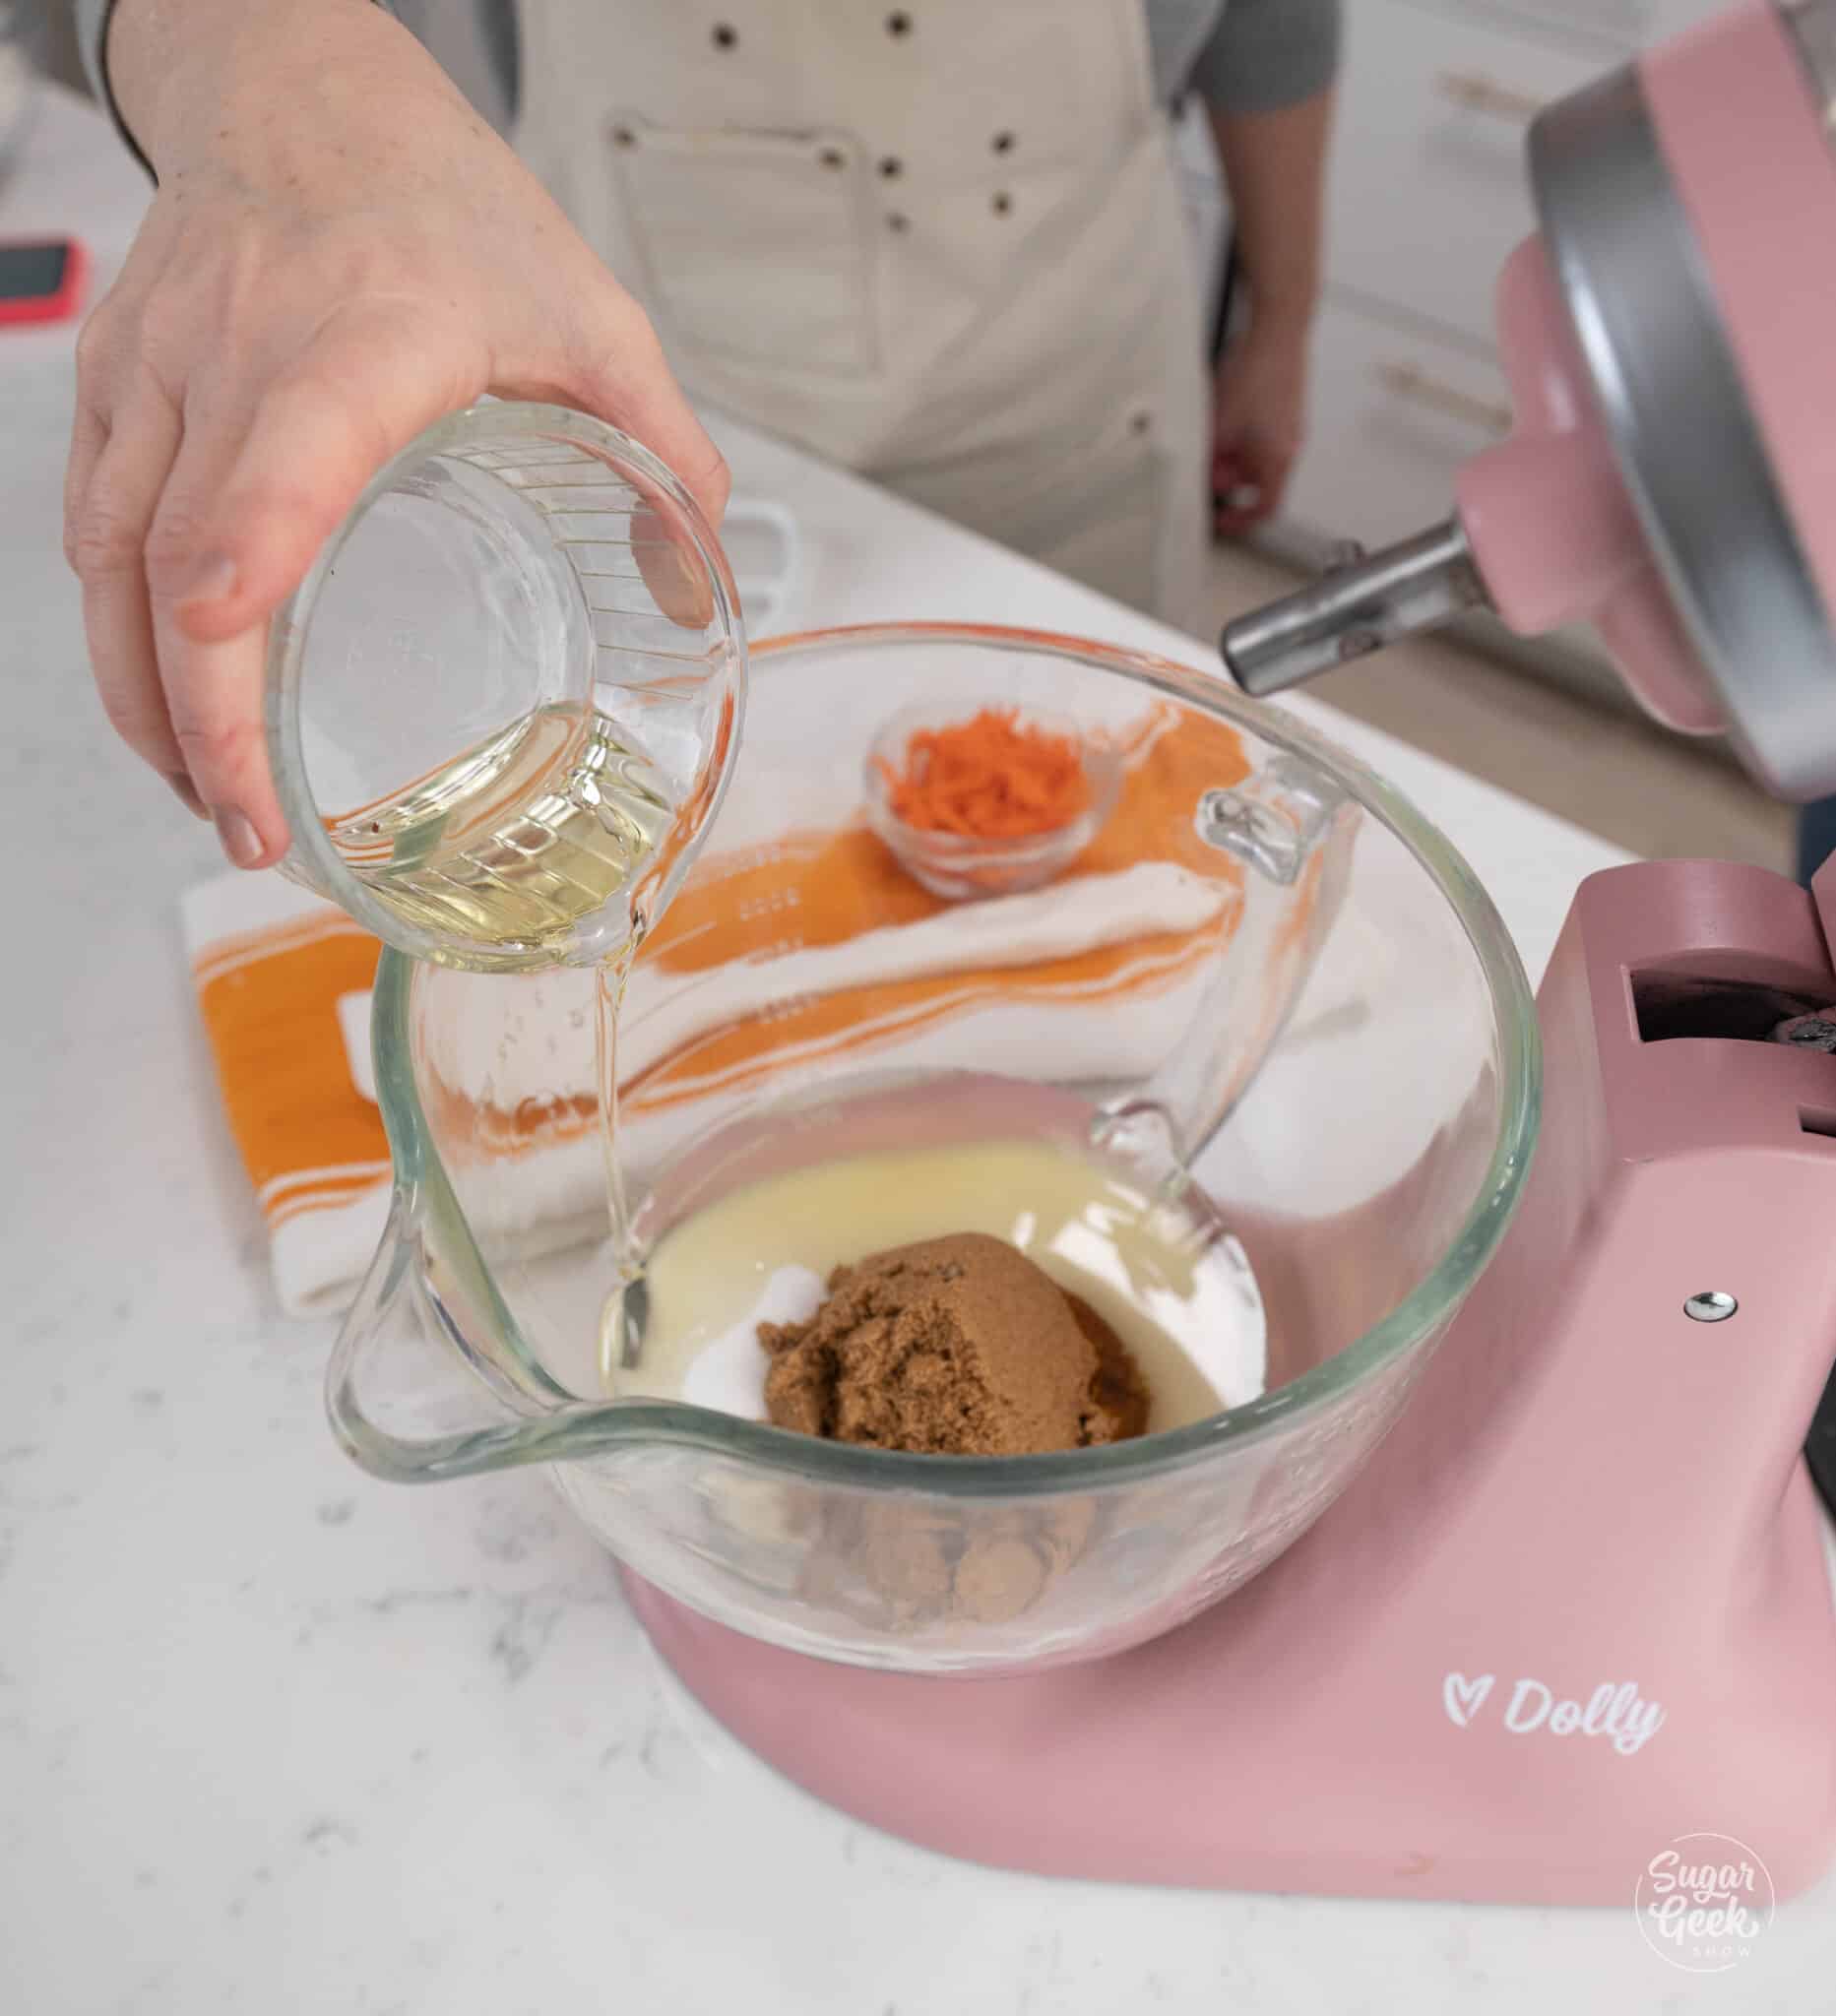 Hand adding oil to a stand mixer bowl